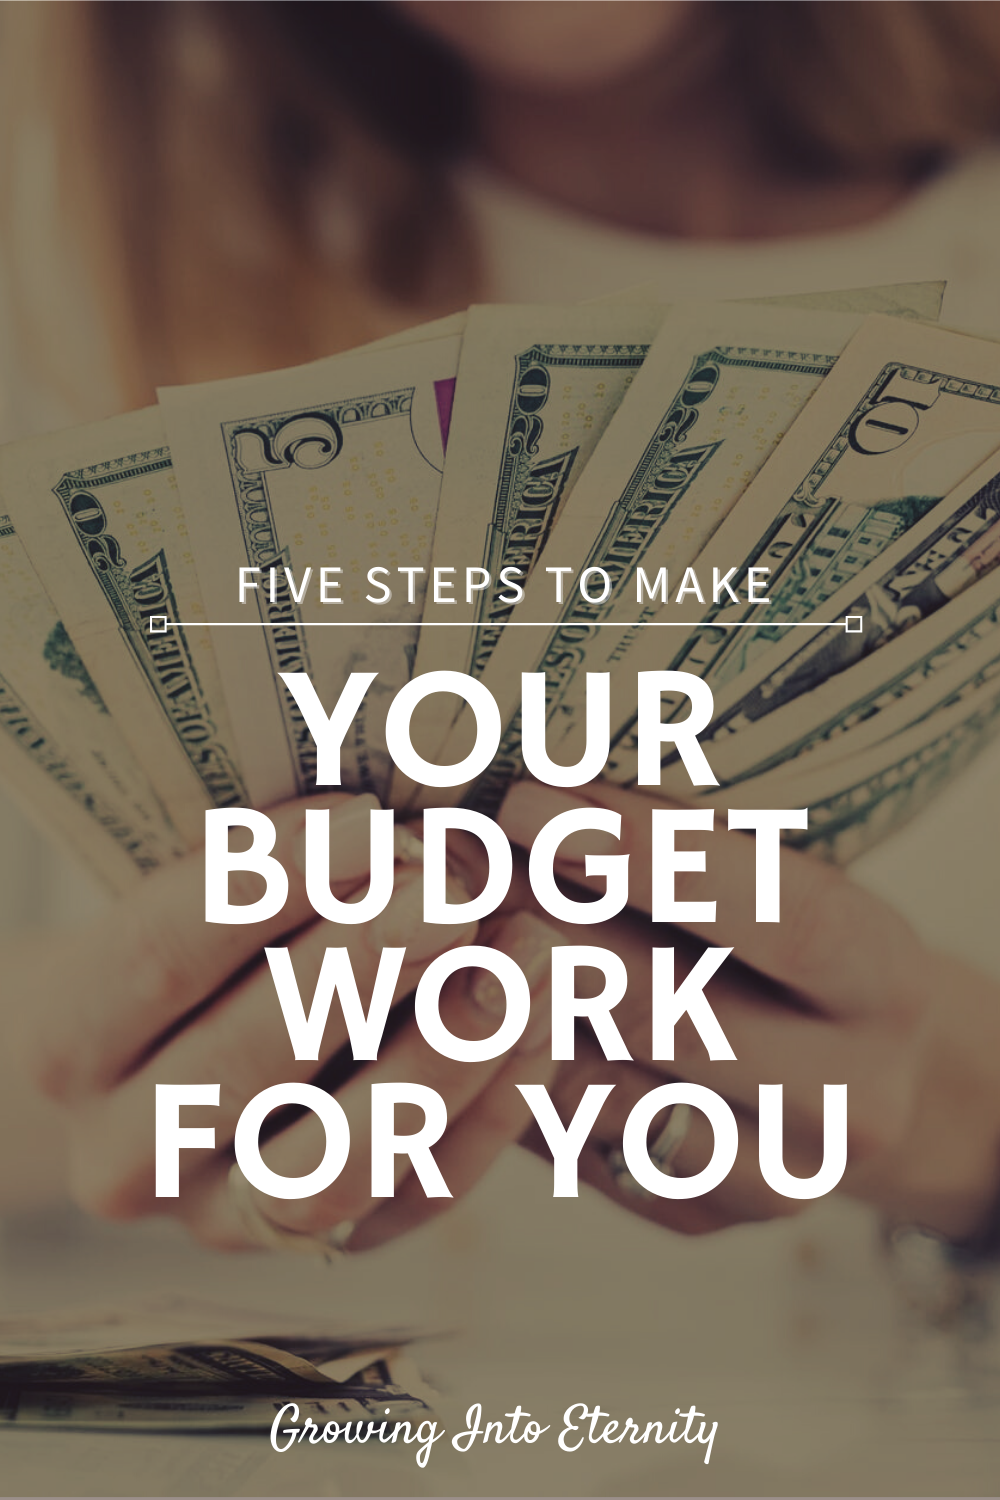 Five Steps to Make Your Budget Work for You